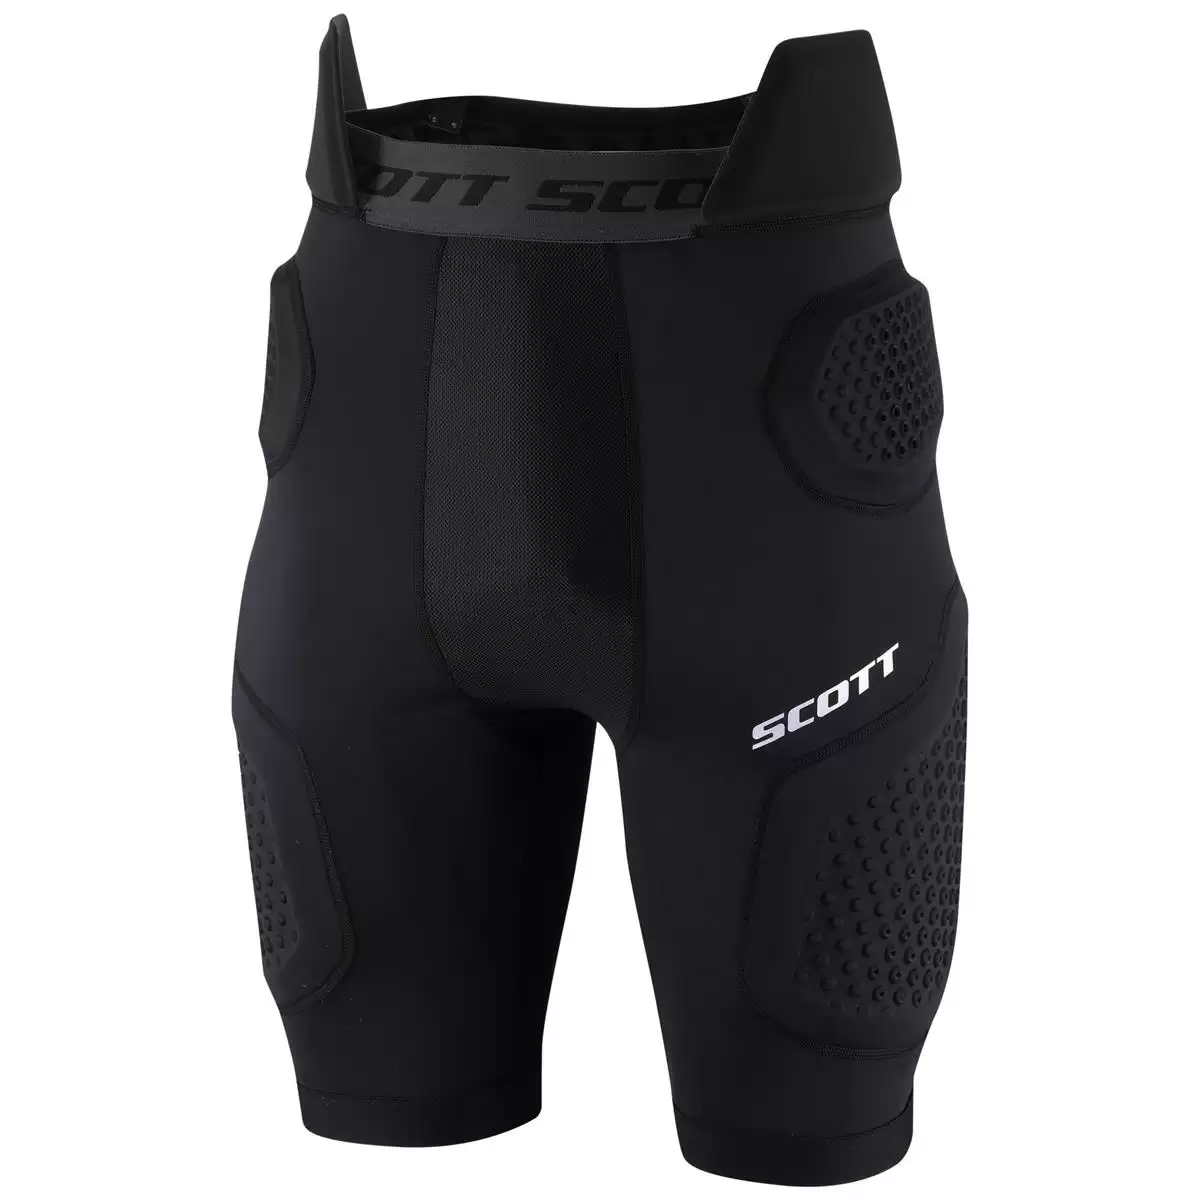 Short protector Softcon air black - Size M - image